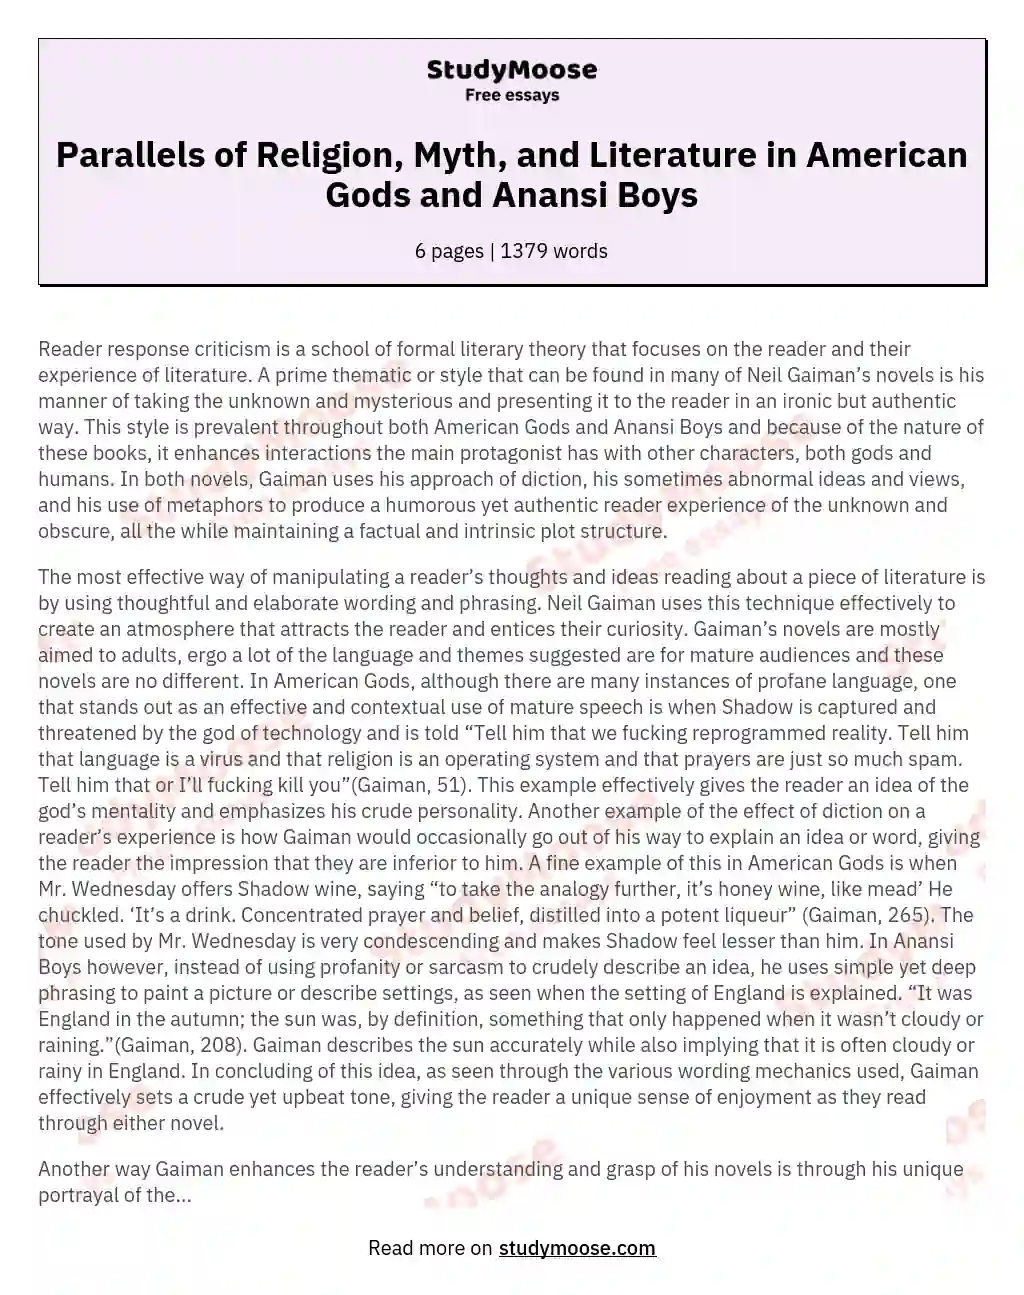 Parallels of Religion, Myth, and Literature in American Gods and Anansi Boys essay